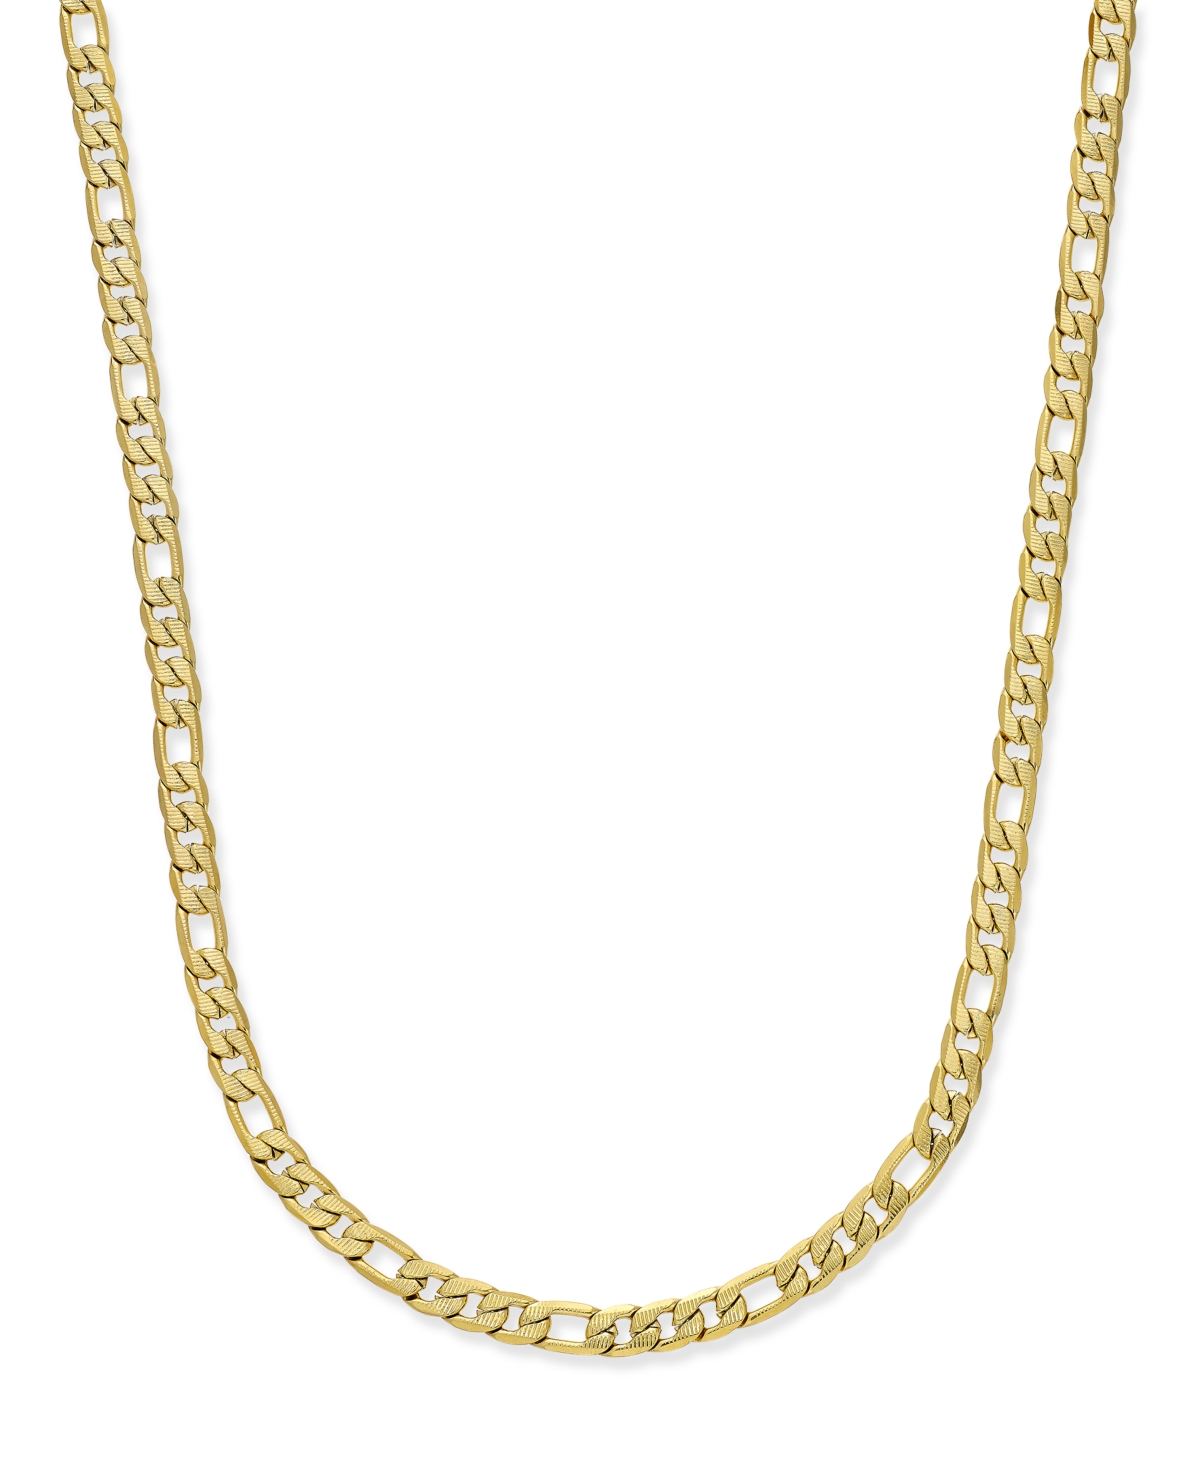 Men's Gold-Tone Figaro Chain Necklace - Gold